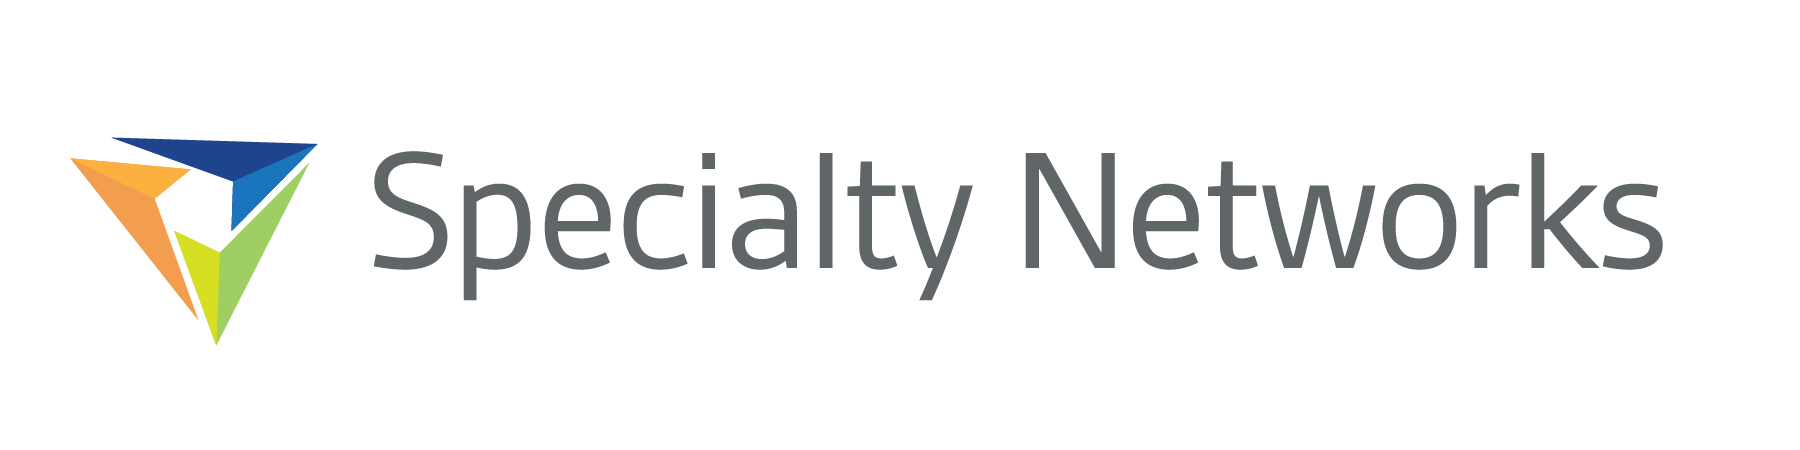 Specialty Networks logo